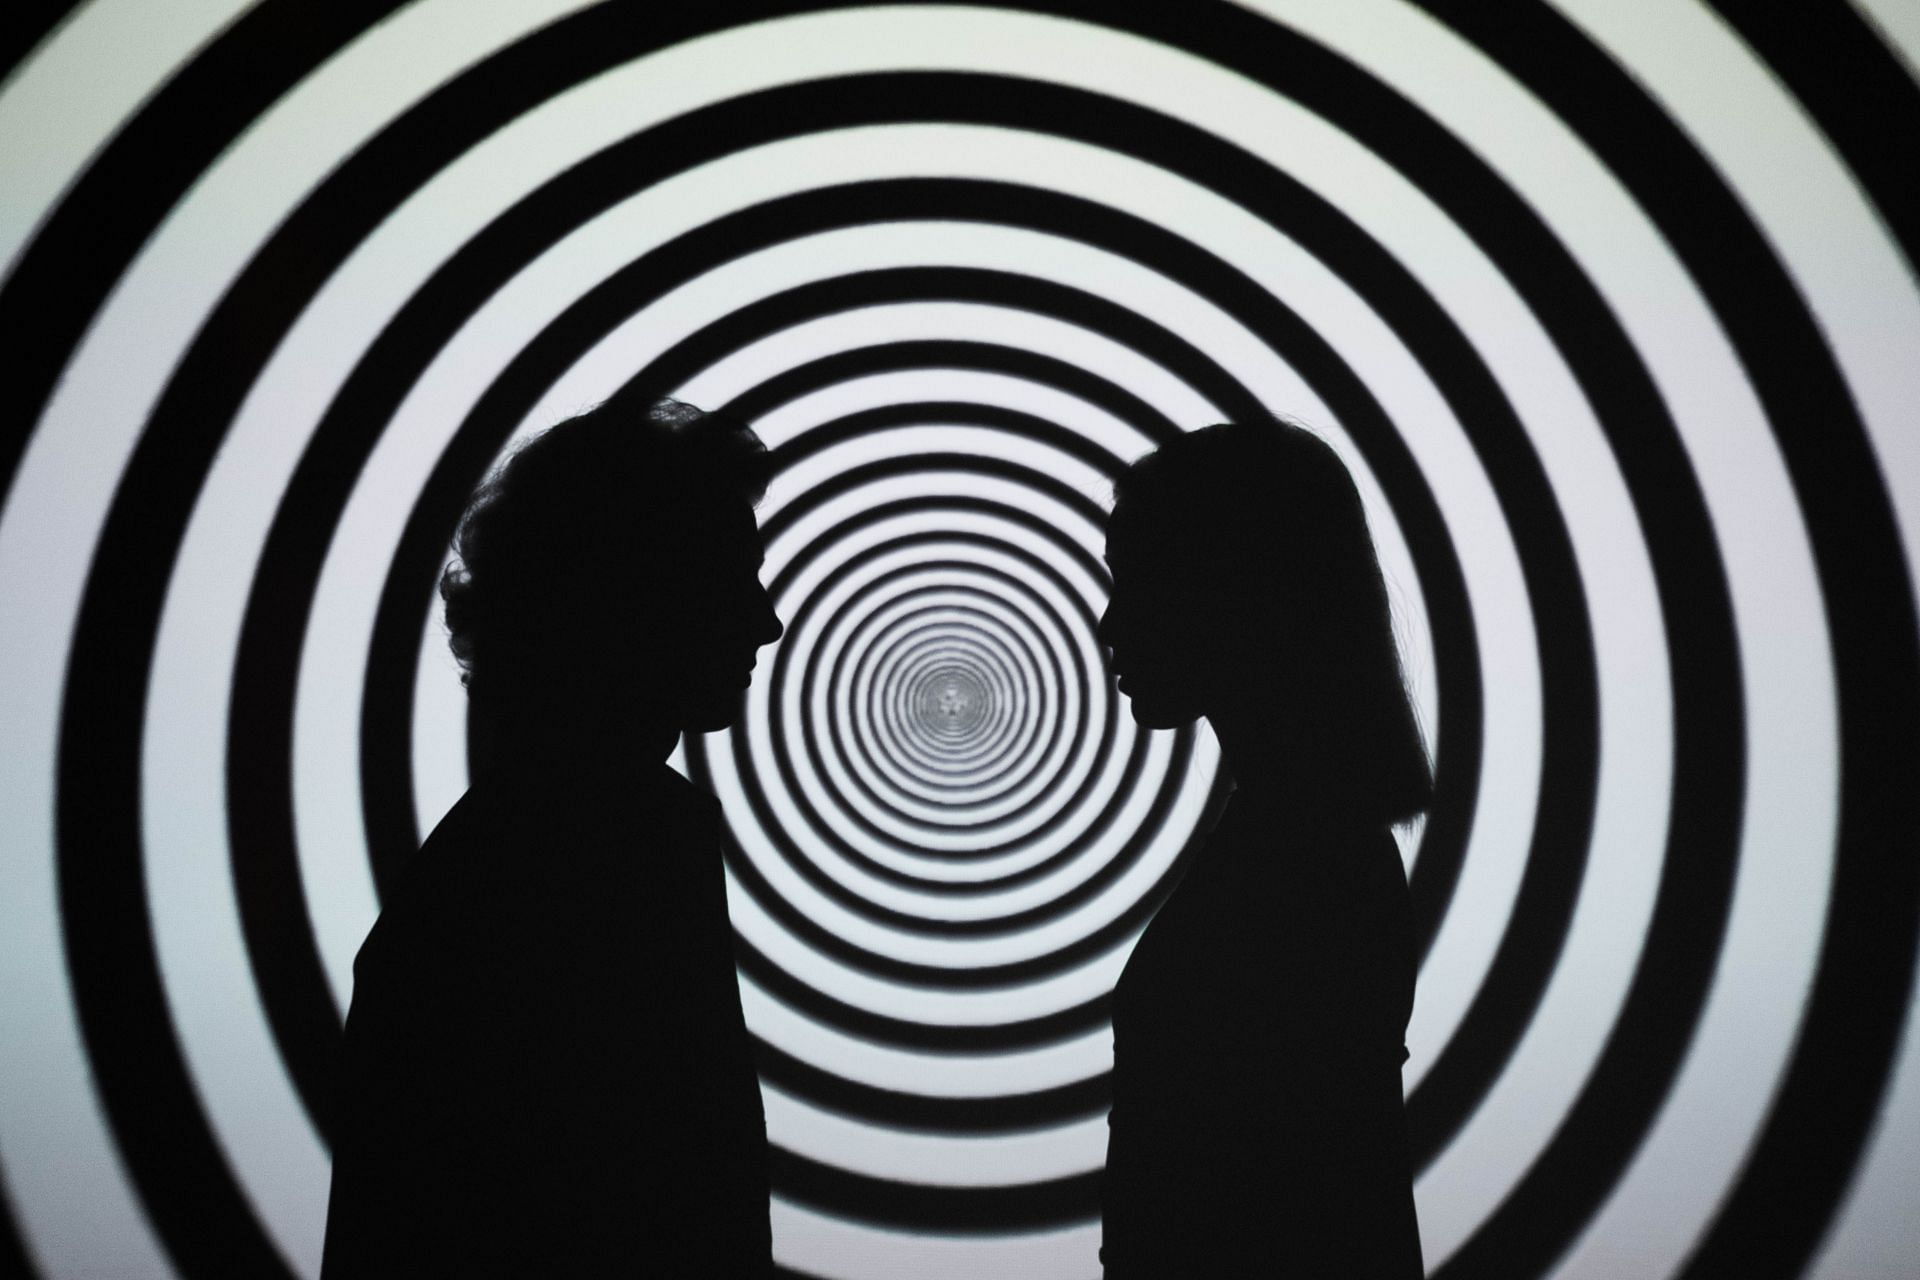 hypnosis therapy: What does it mean to be hypnotized? - exploring